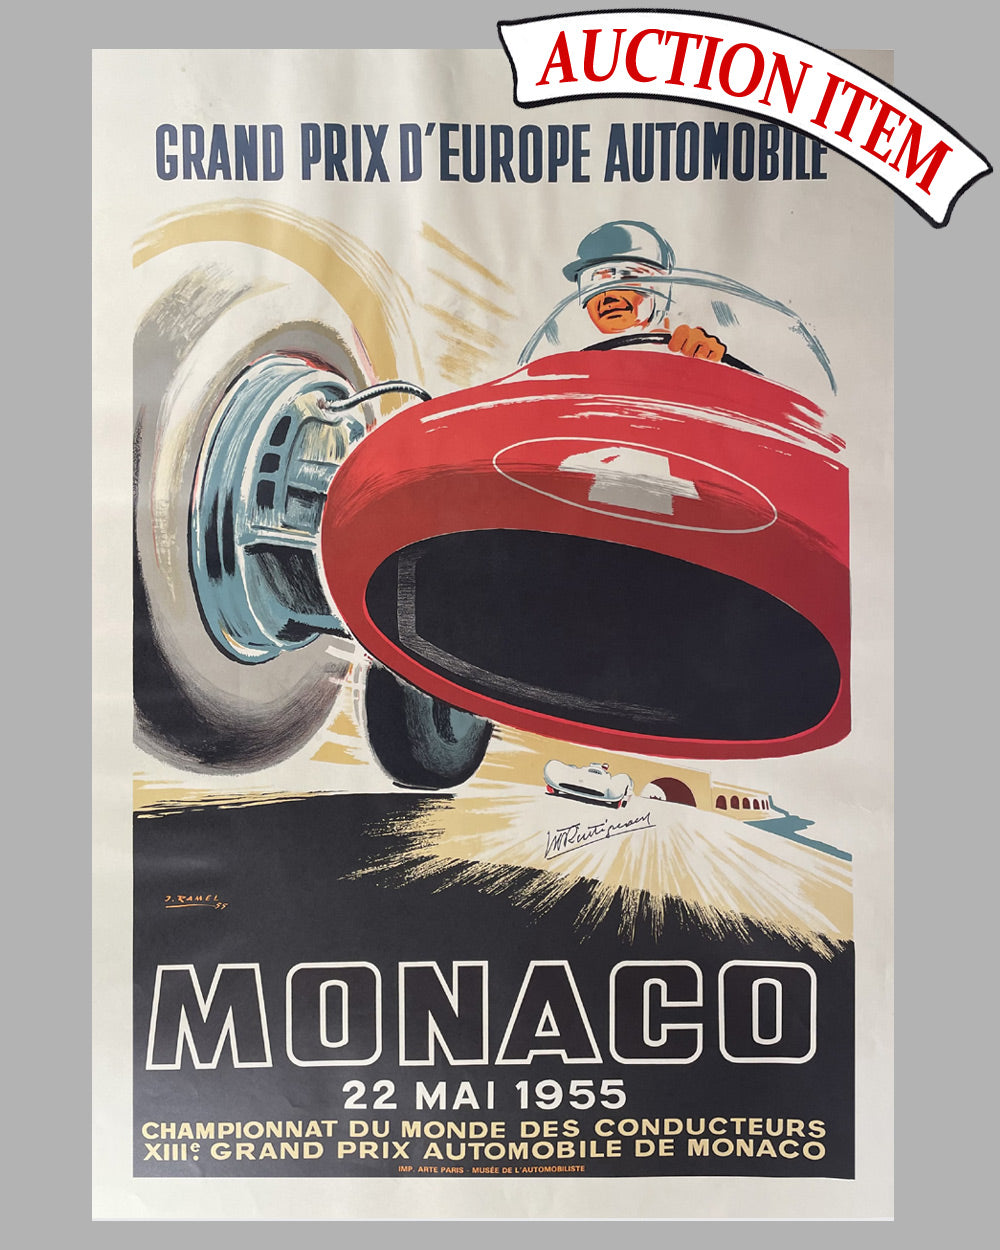 1955 Grand Prix of Monaco poster by J. Ramel, autographed by Trintignant